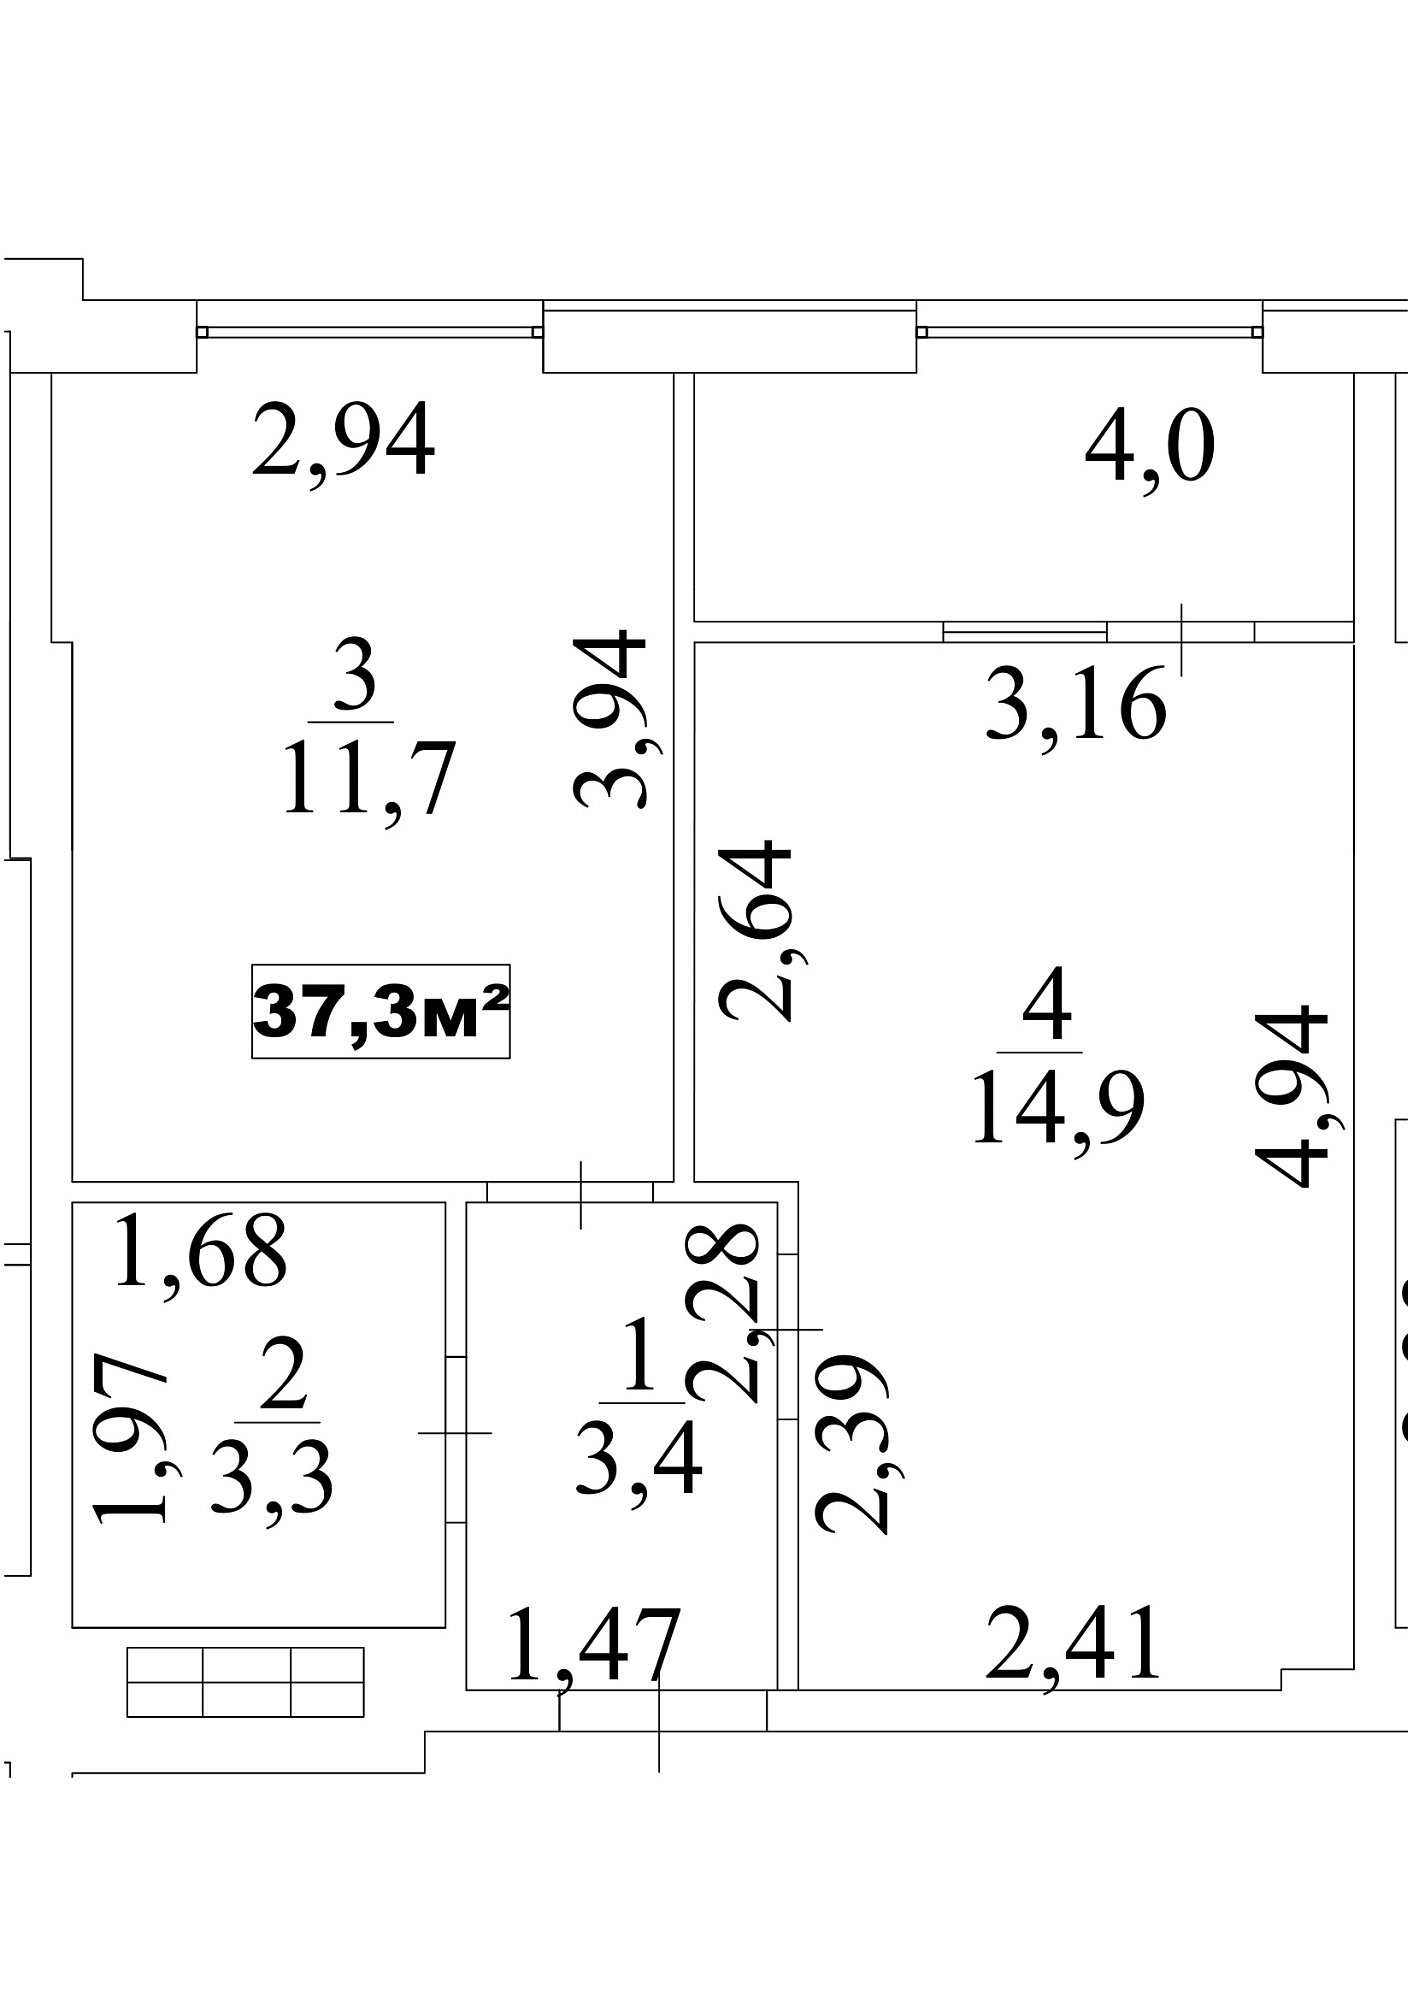 Planning 1-rm flats area 37.3m2, AB-10-02/00015.